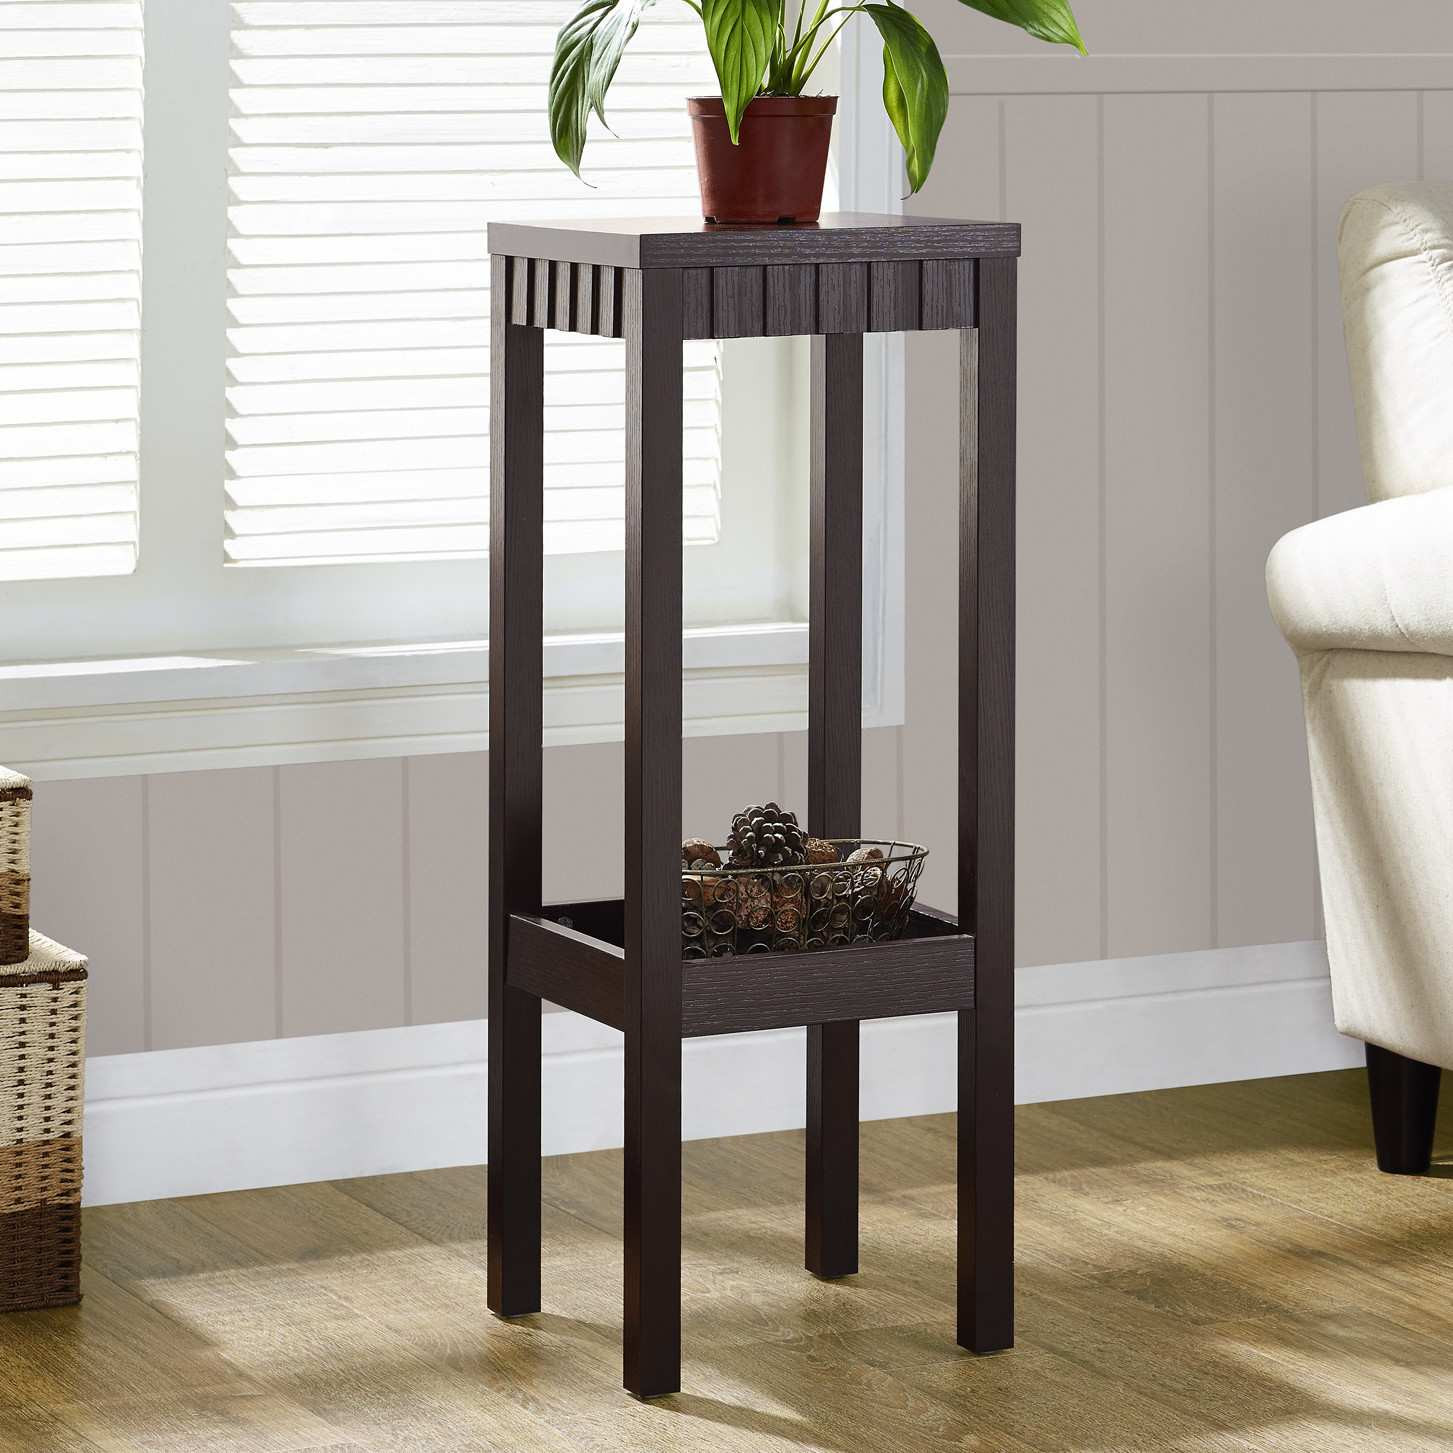 Small Corner Table For Bathroom
 Perfect Small Bathroom Accent Tables For Storage Towels